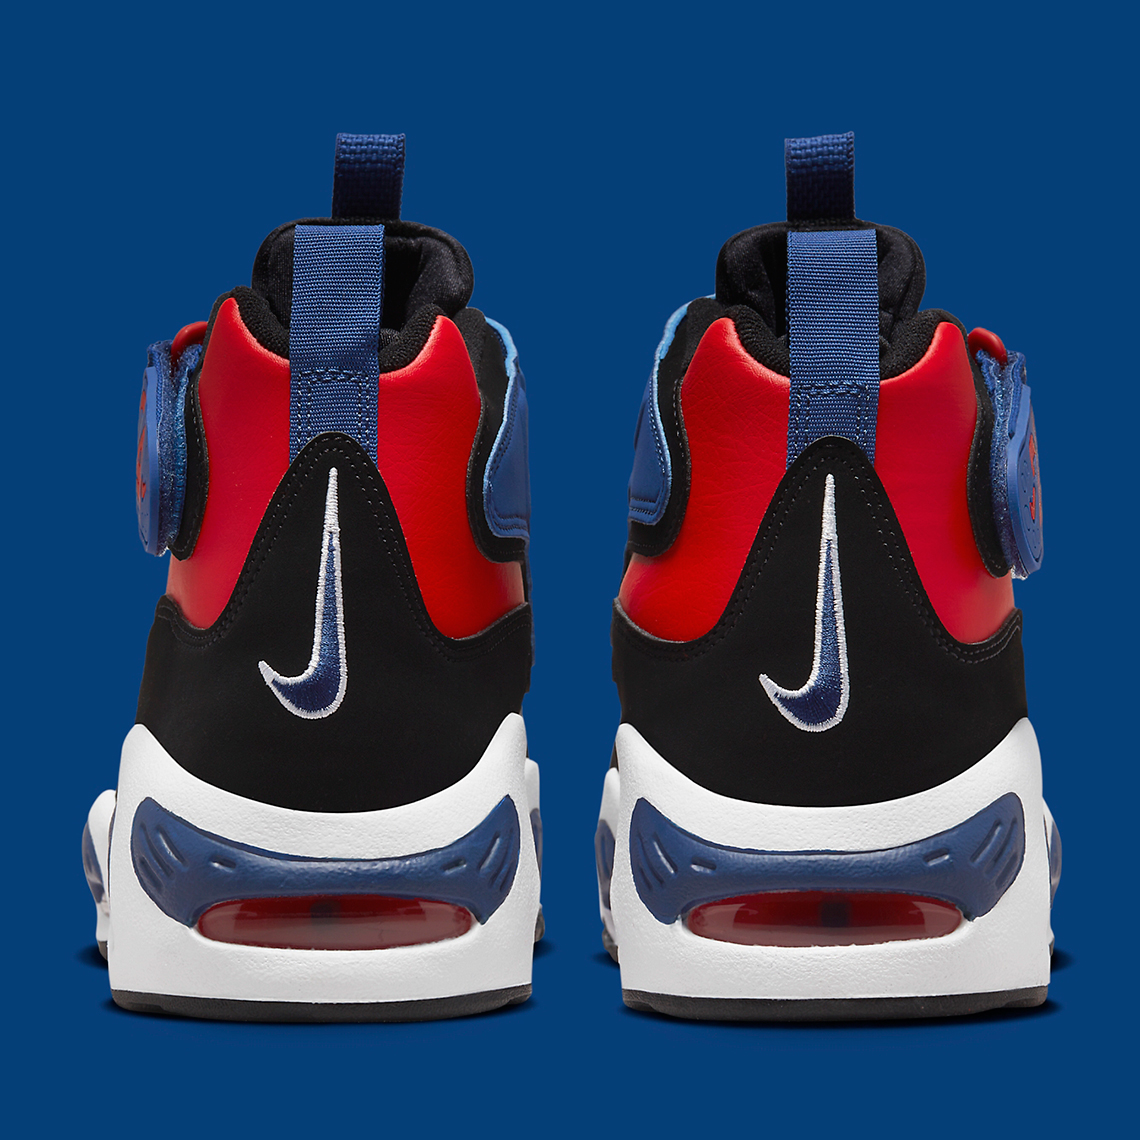 nike-air-griffey-max-1-navy-red-release-date-3.jpg